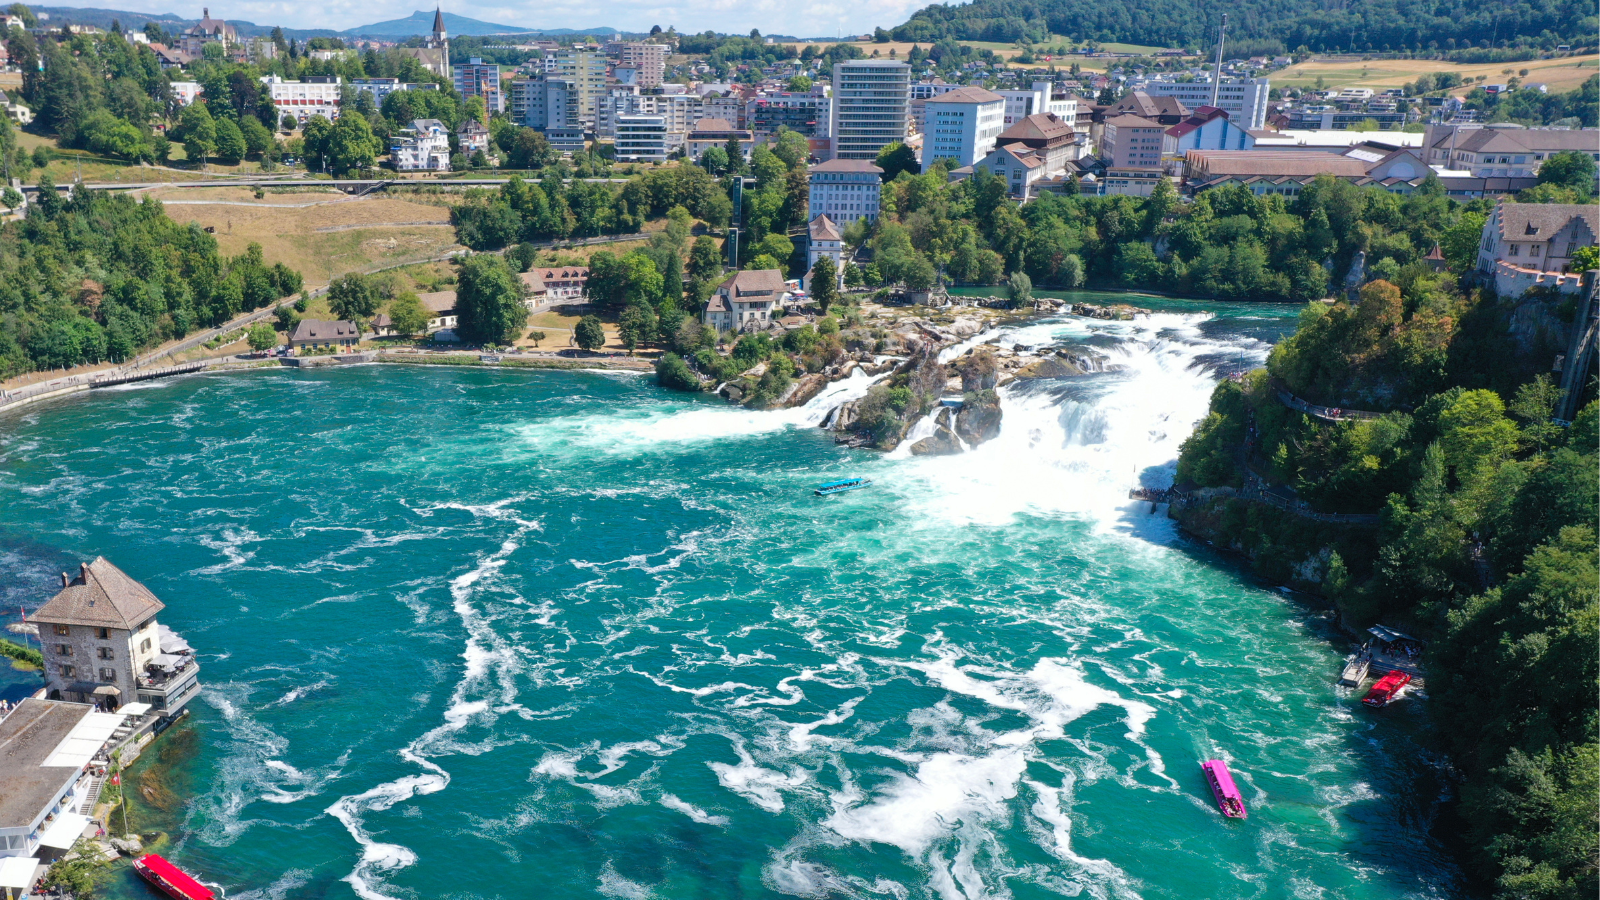 The sixth thing in the list of 10 best things to do in Switzerland - Explore the Rhine Falls